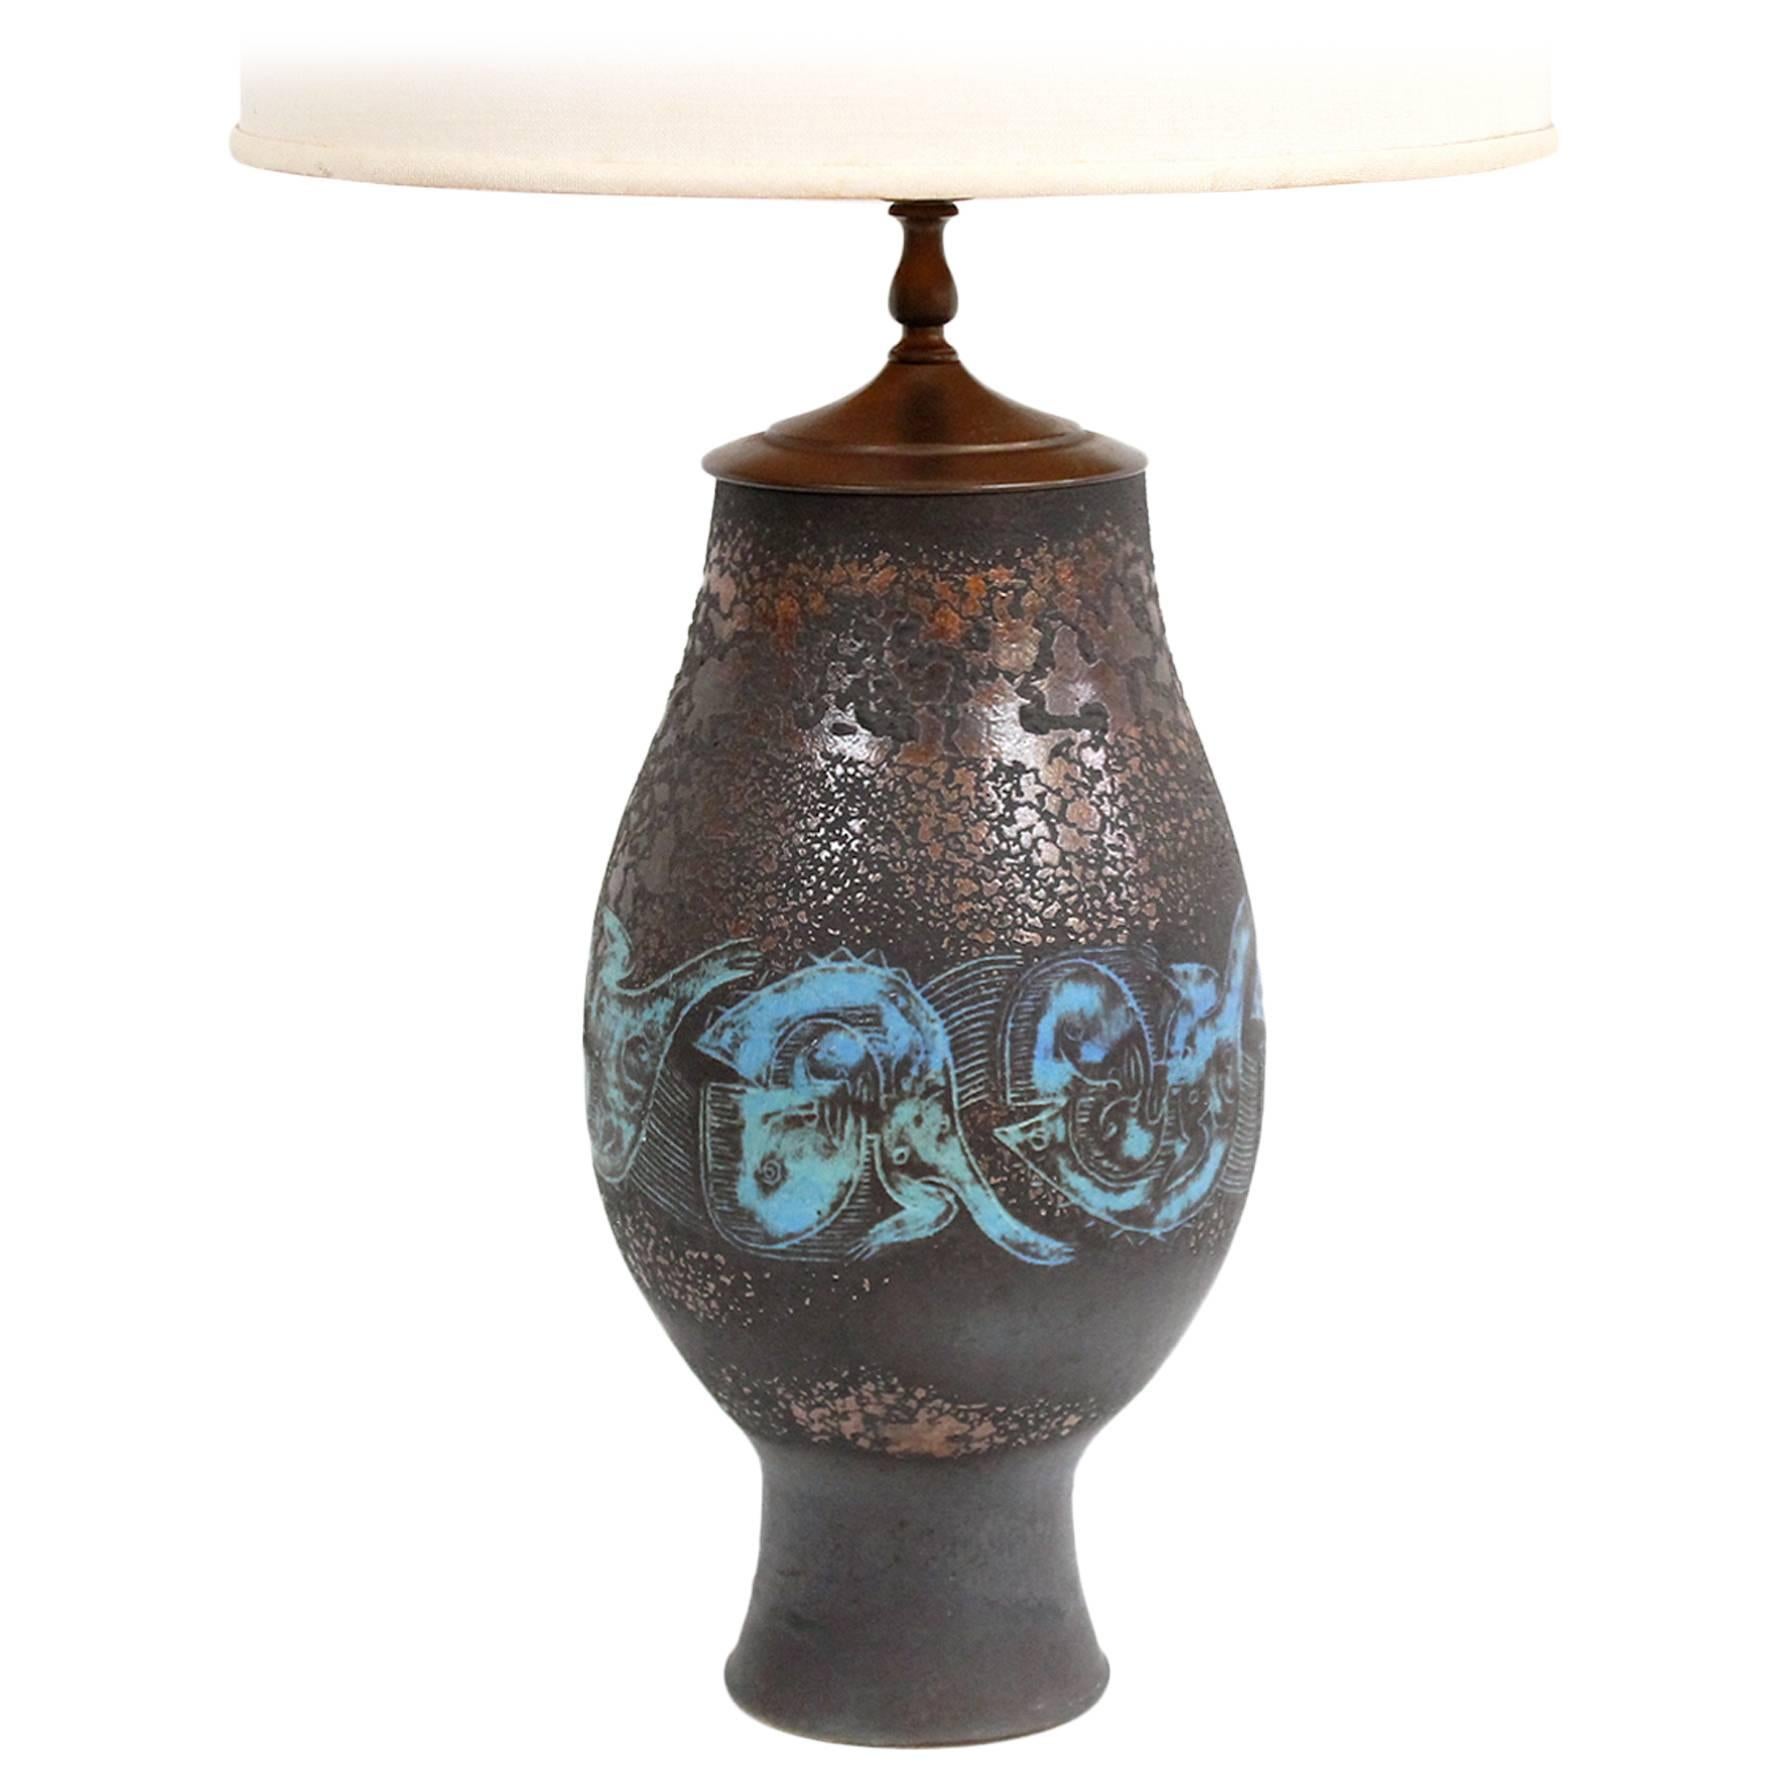 Edwin and Mary Scheier Pottery Lamp